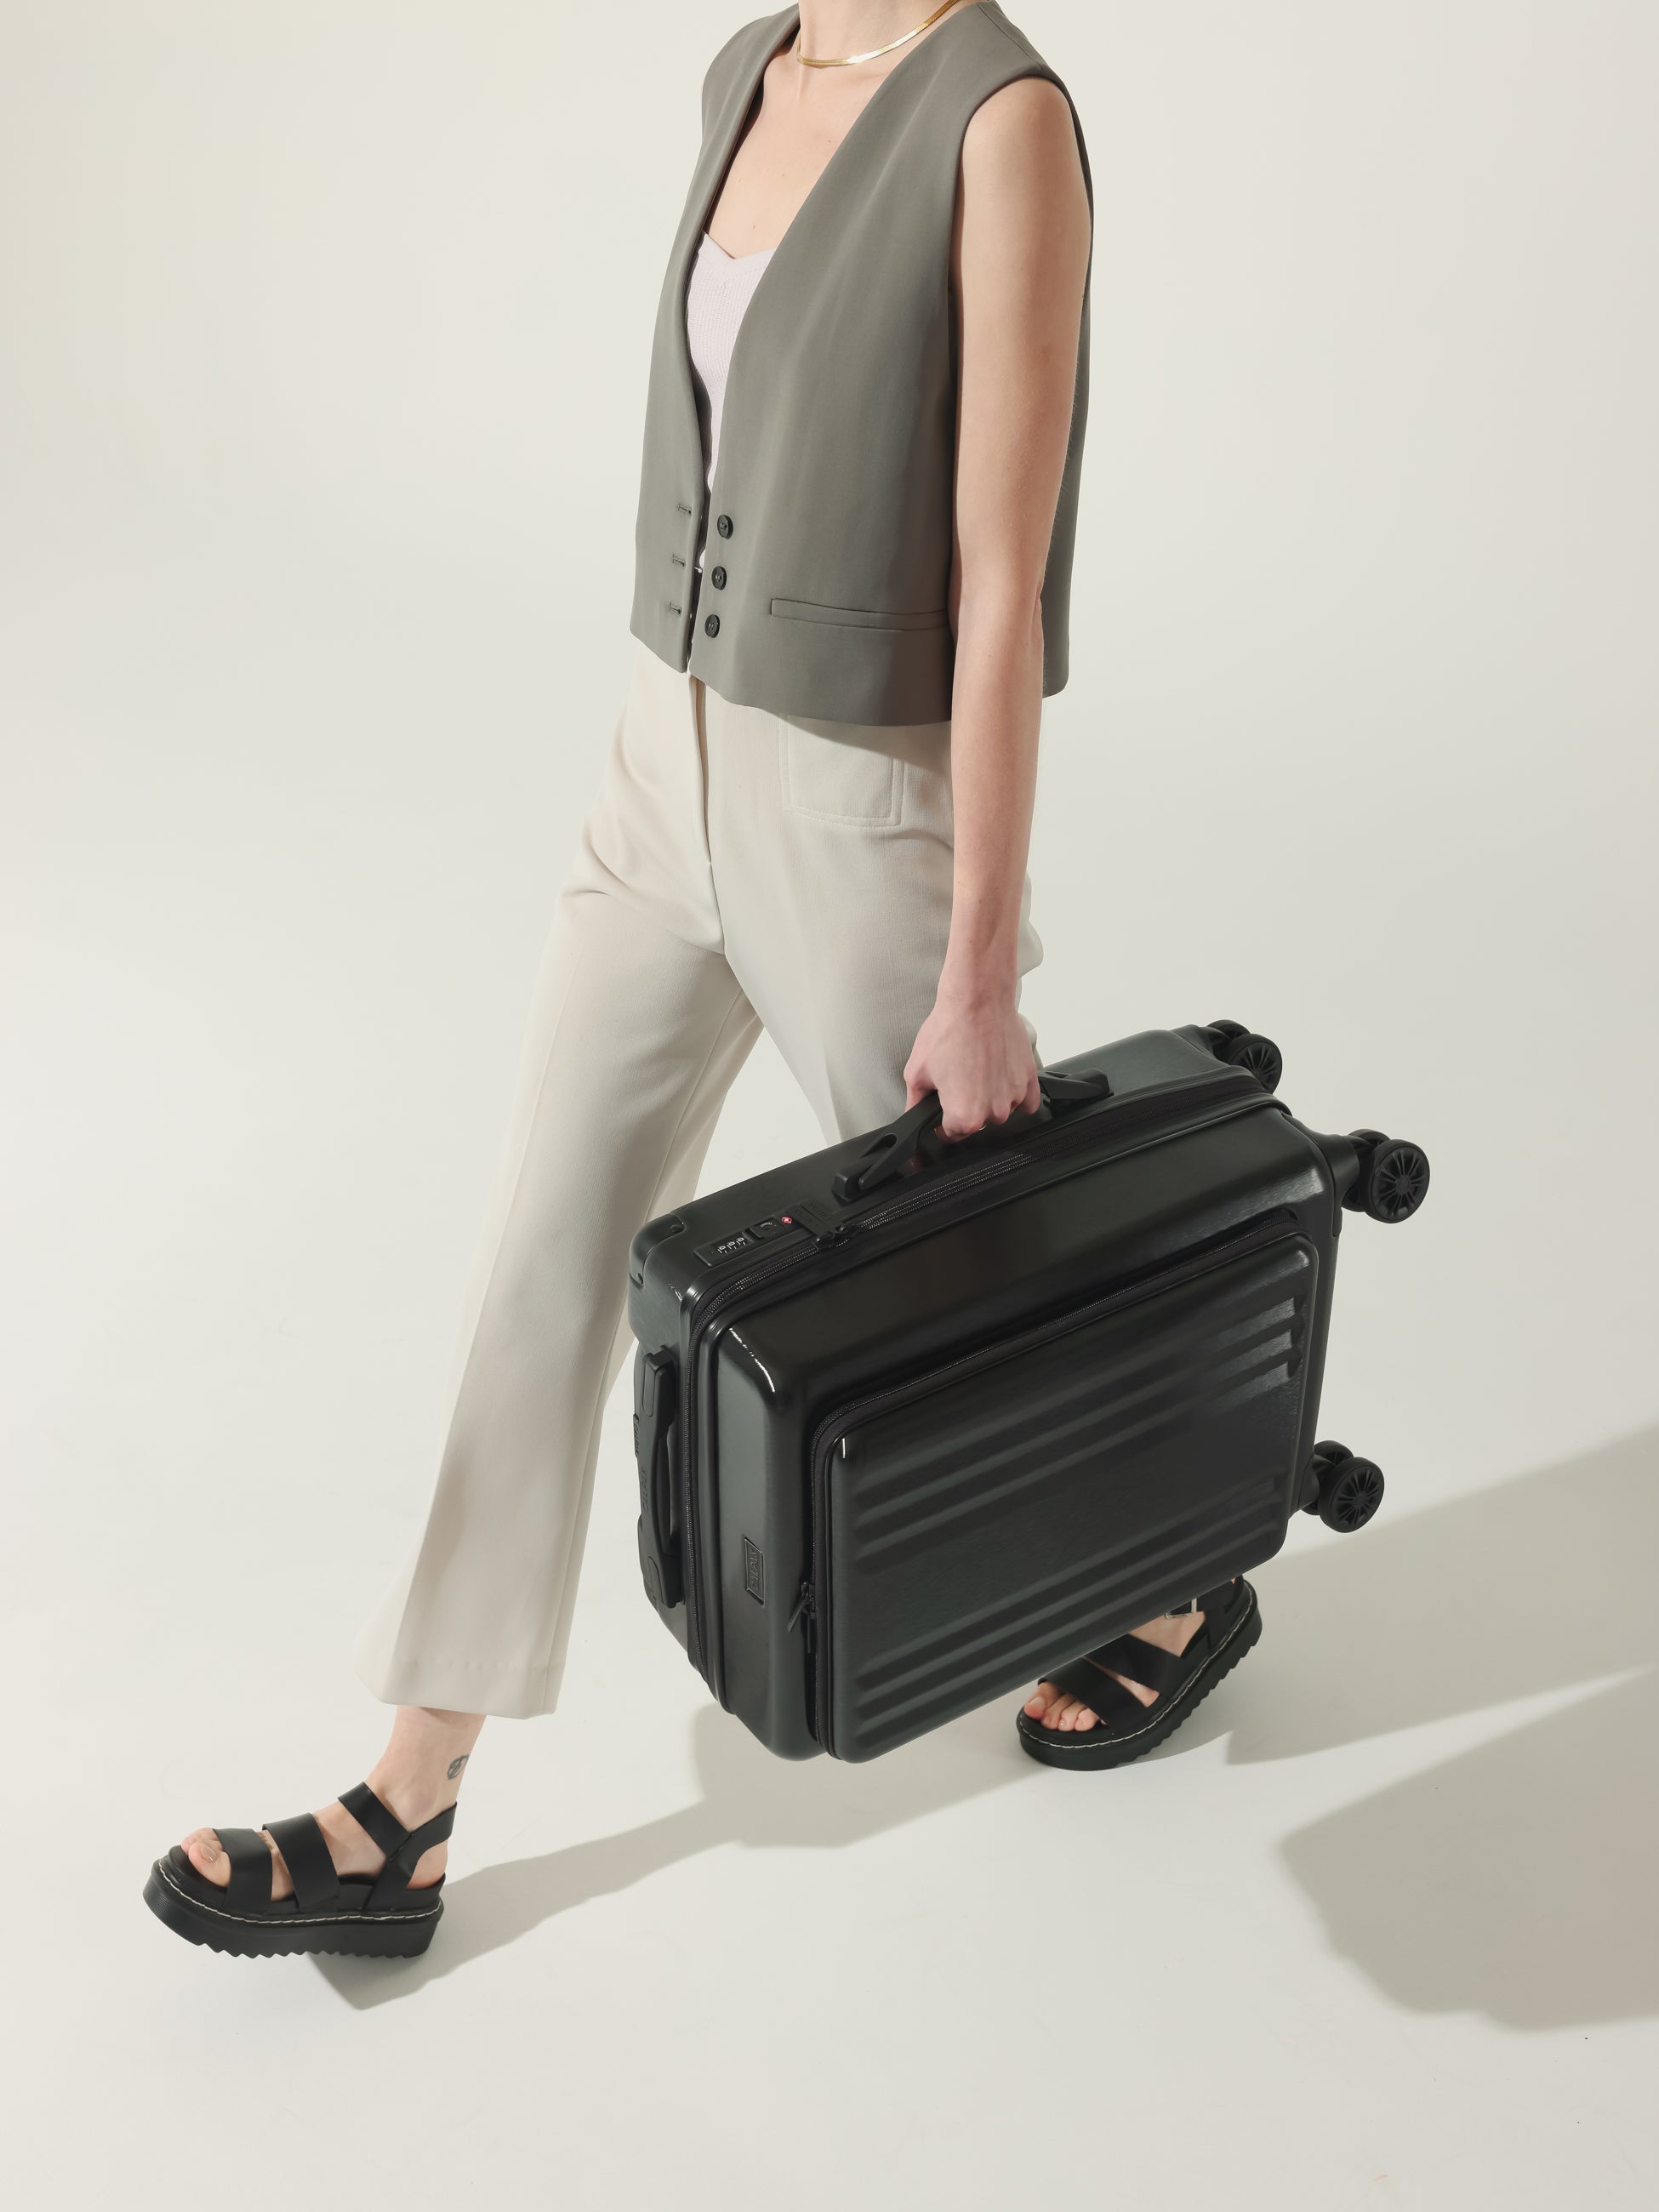 The Calpak Ambeur Carry-On is the most fashionable way to travel